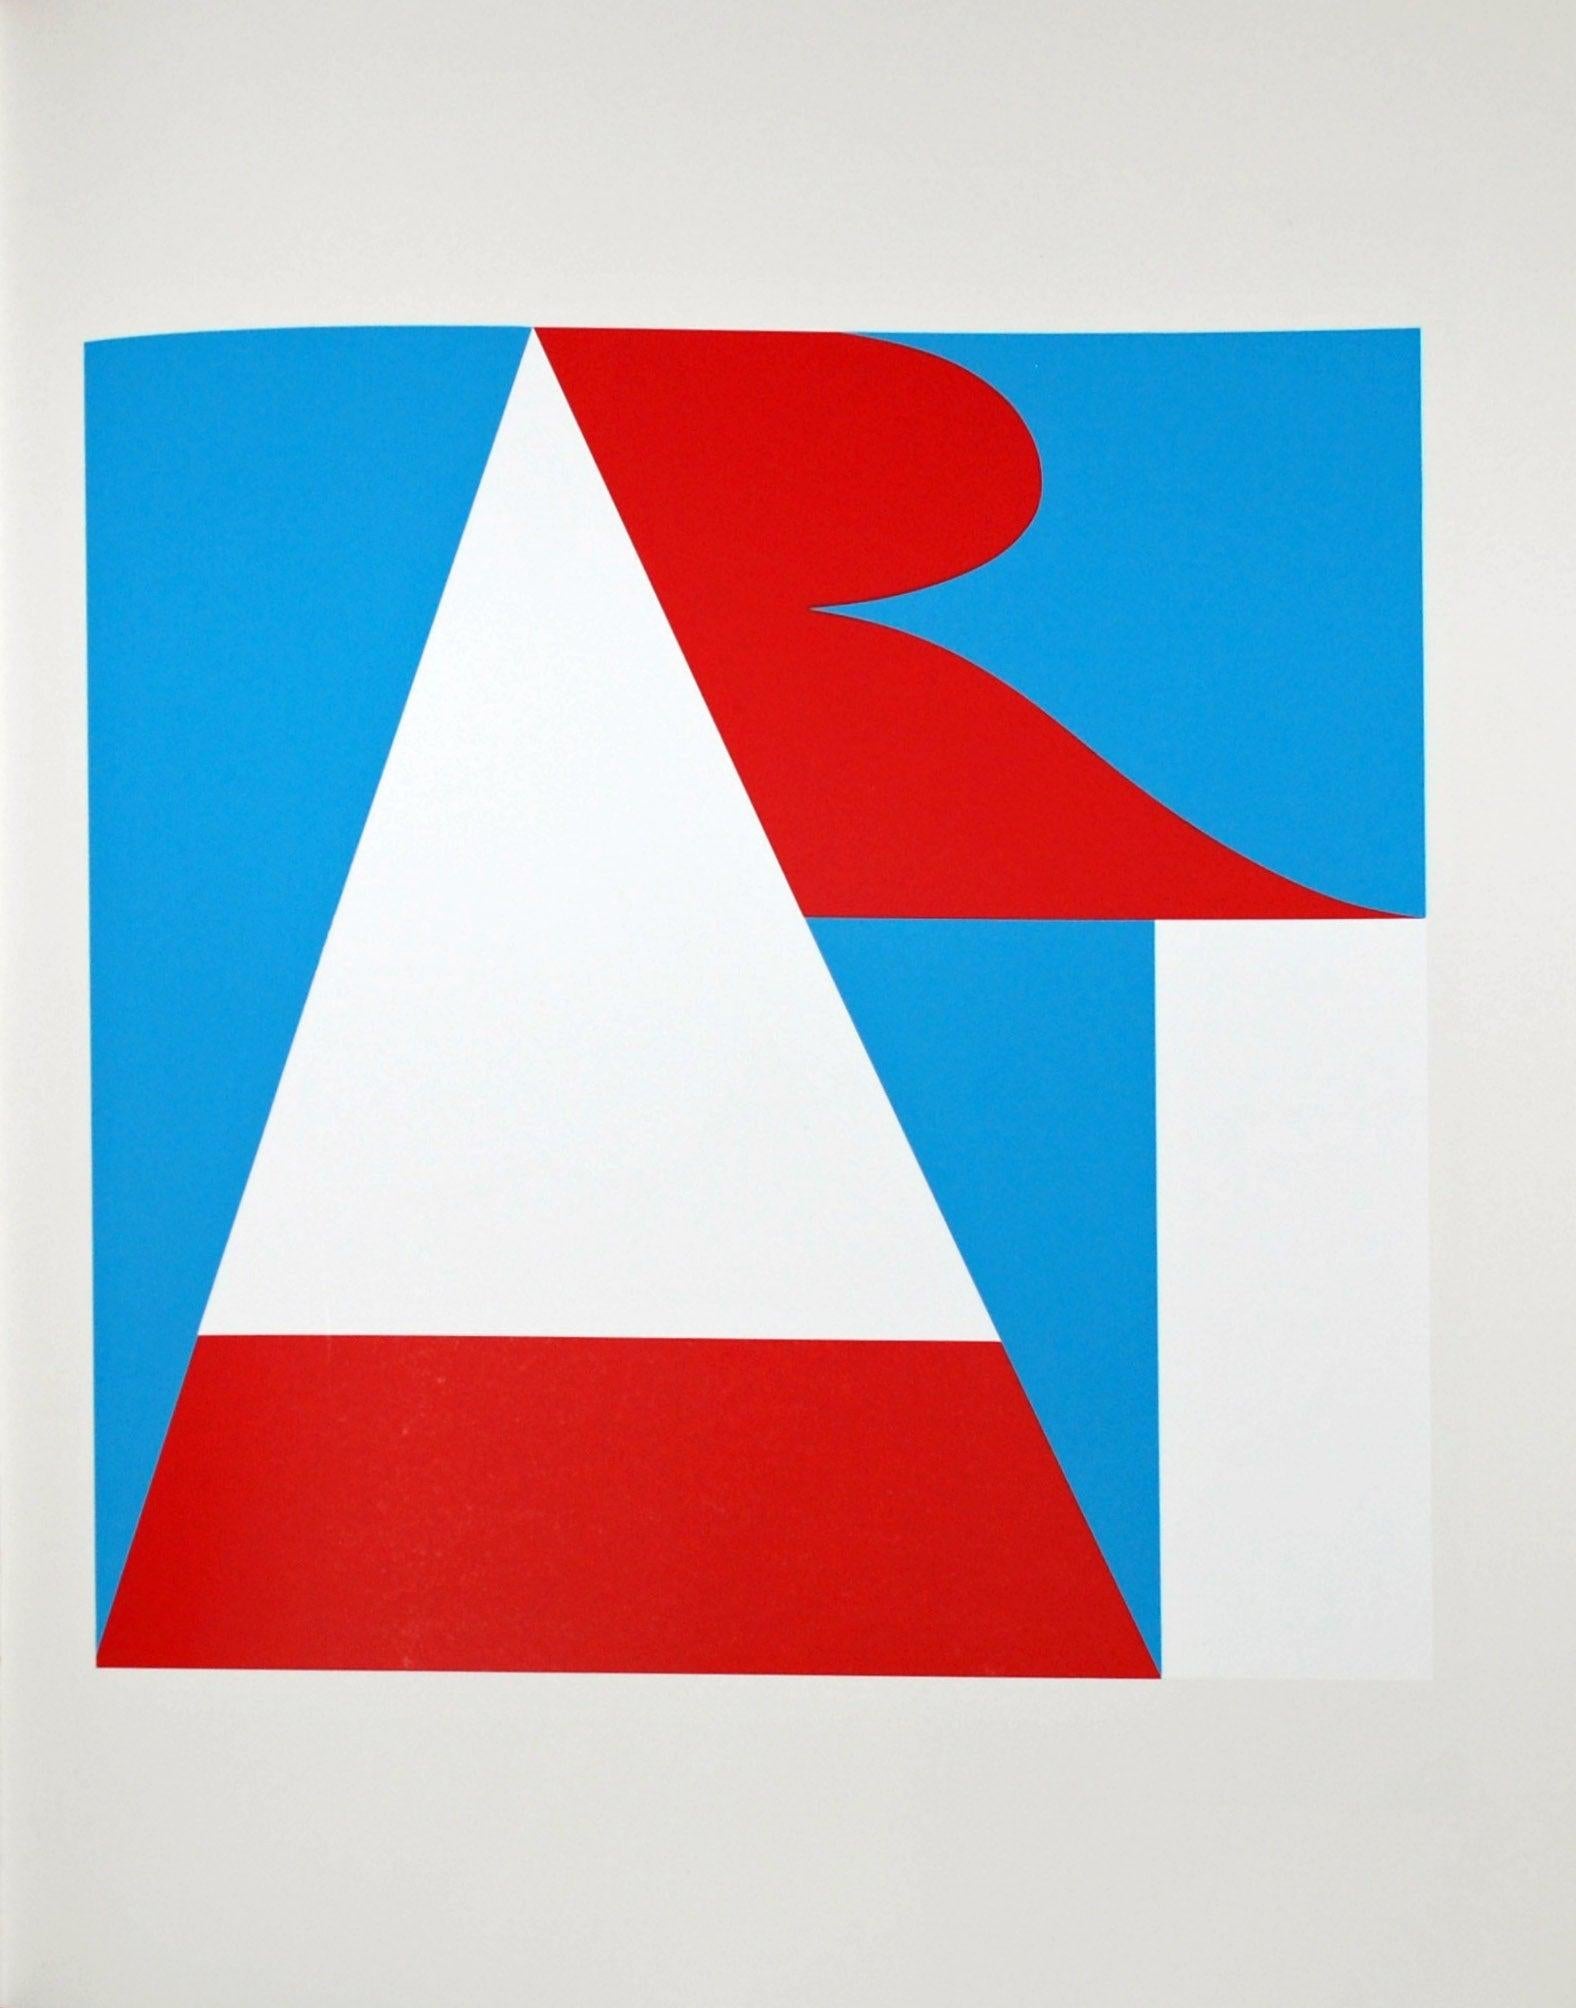 Art, from The American Dream - Print by Robert Indiana